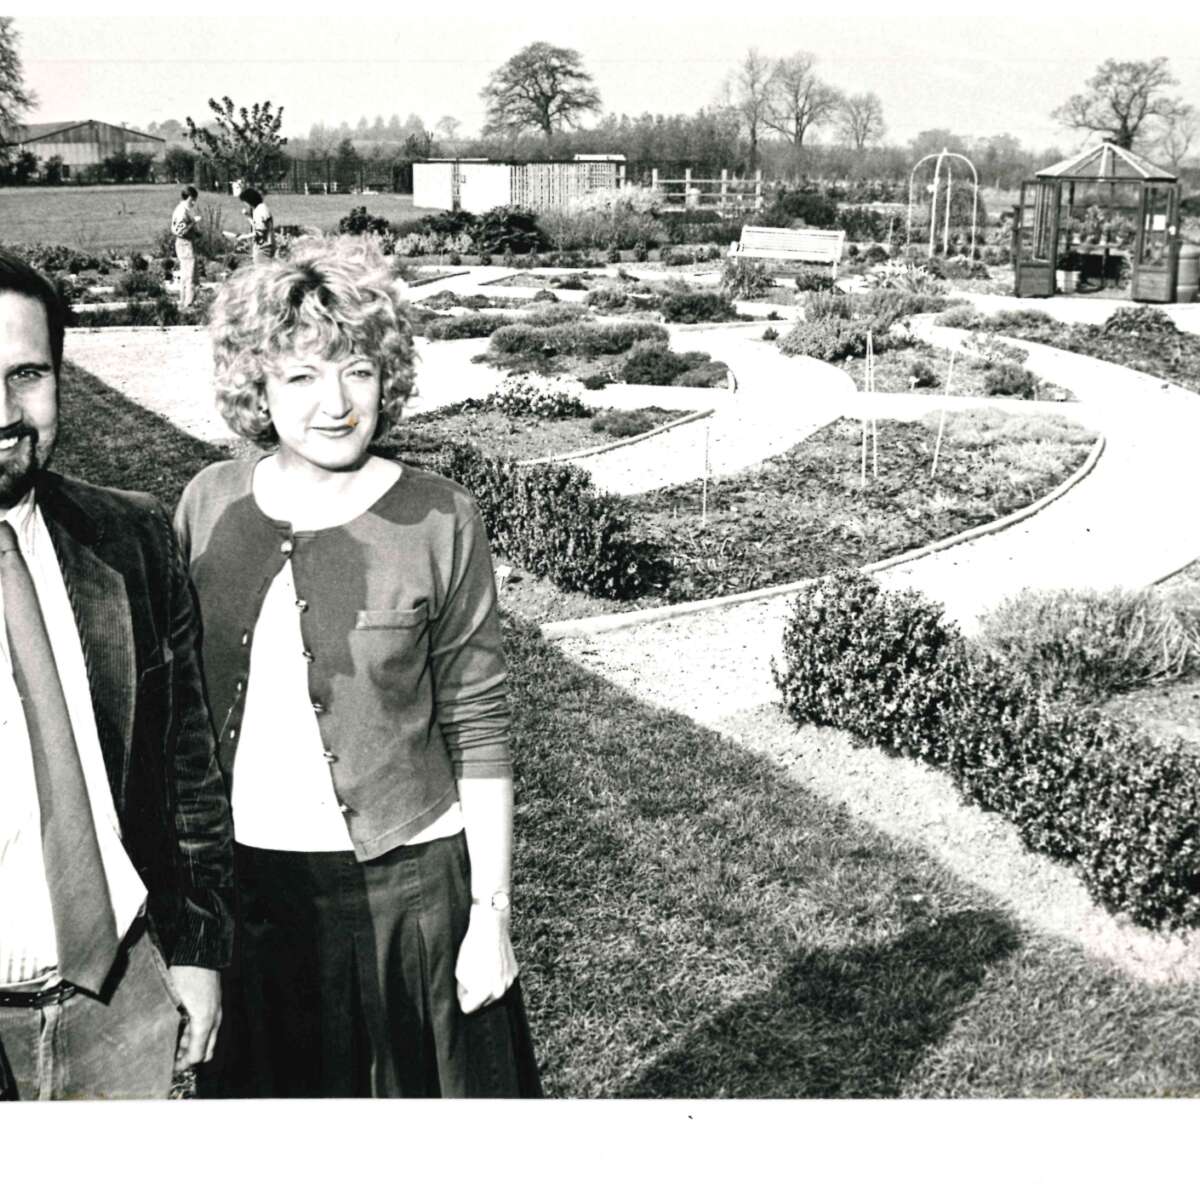 Alan and Jackie Gear at Ryton Gardens in 1986